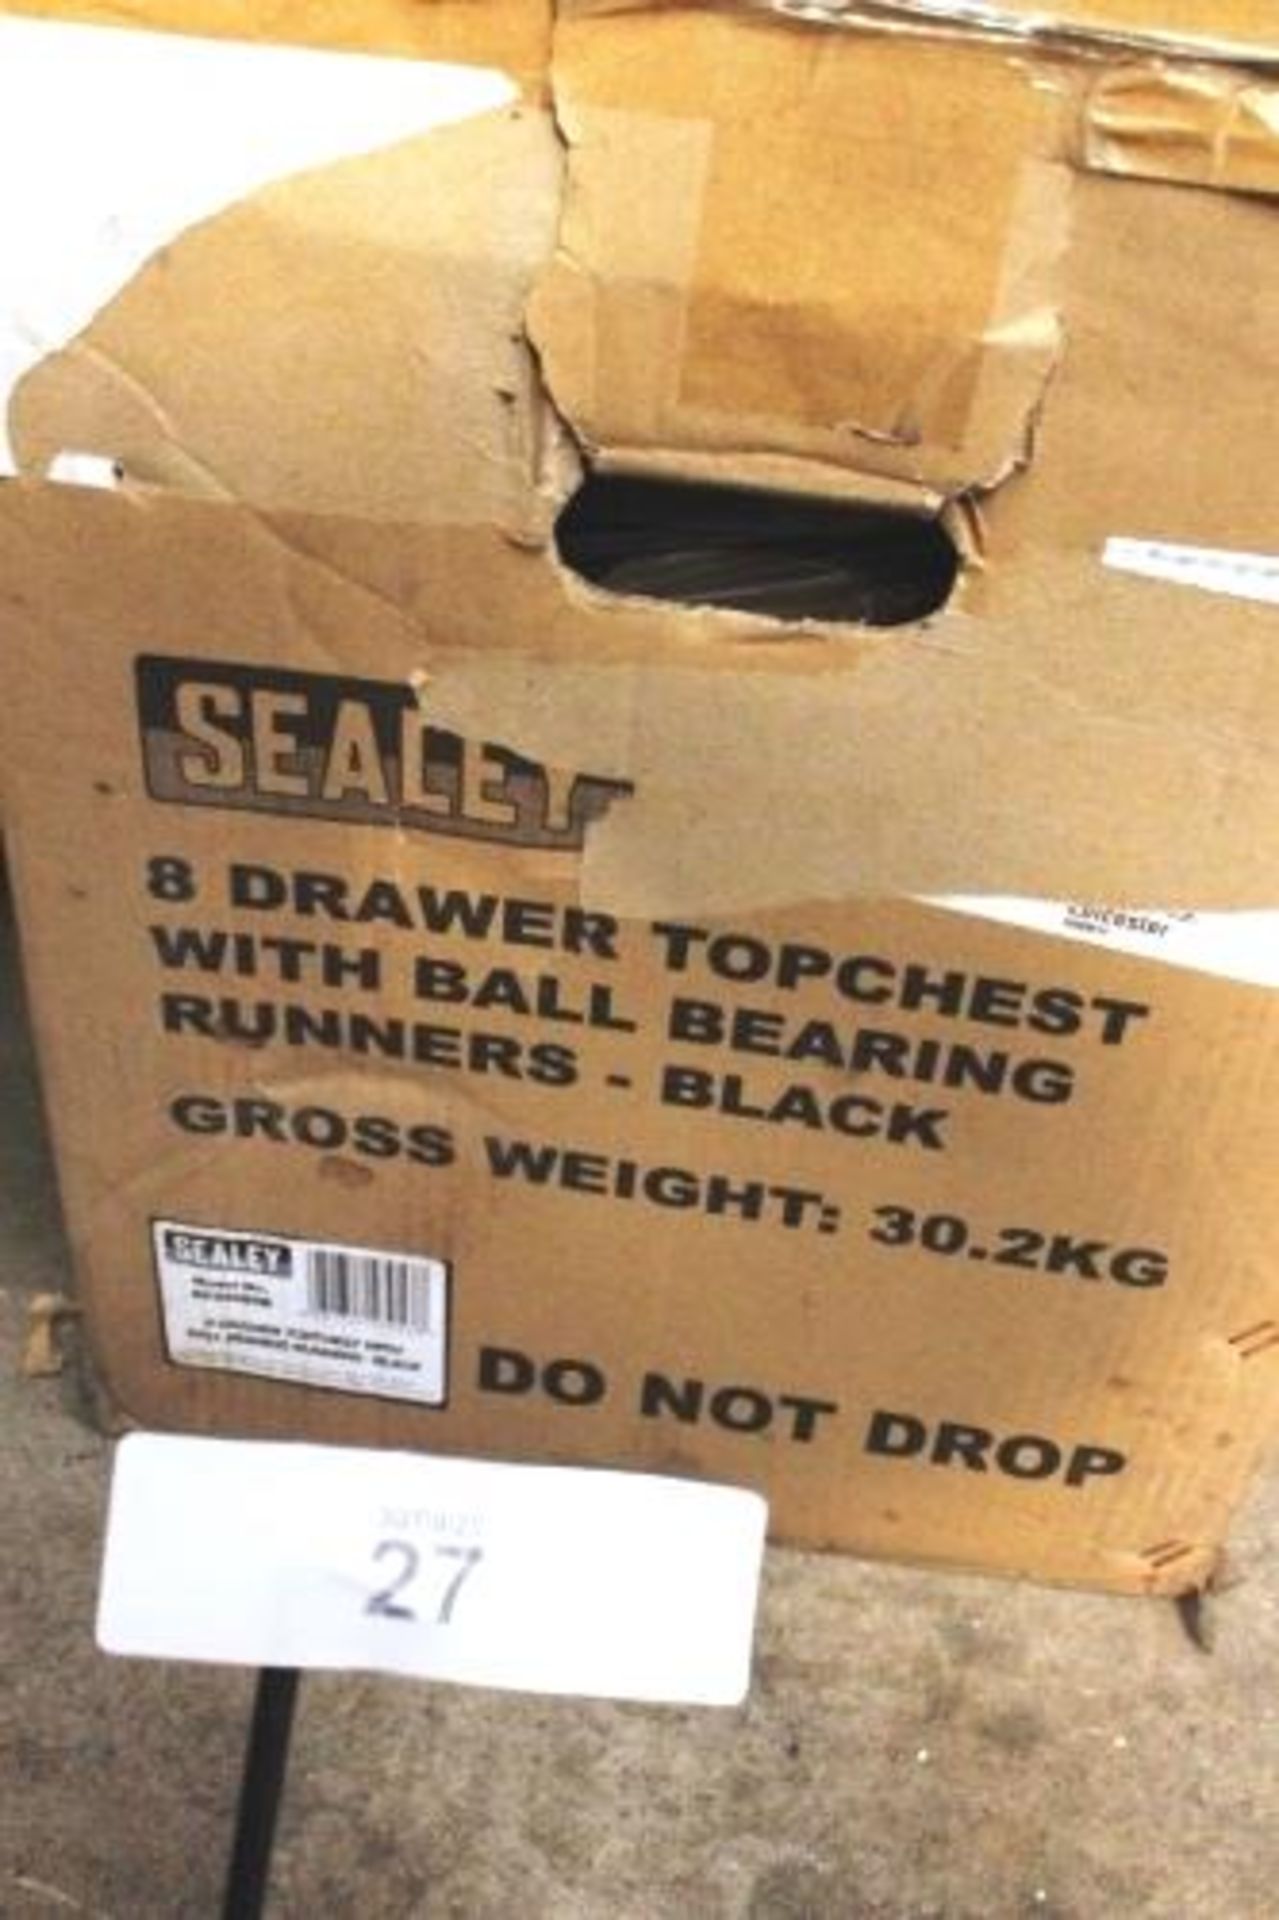 1 x Sealey 8 drawer top chest, colour black, model AP33089B - New in box (GS19)